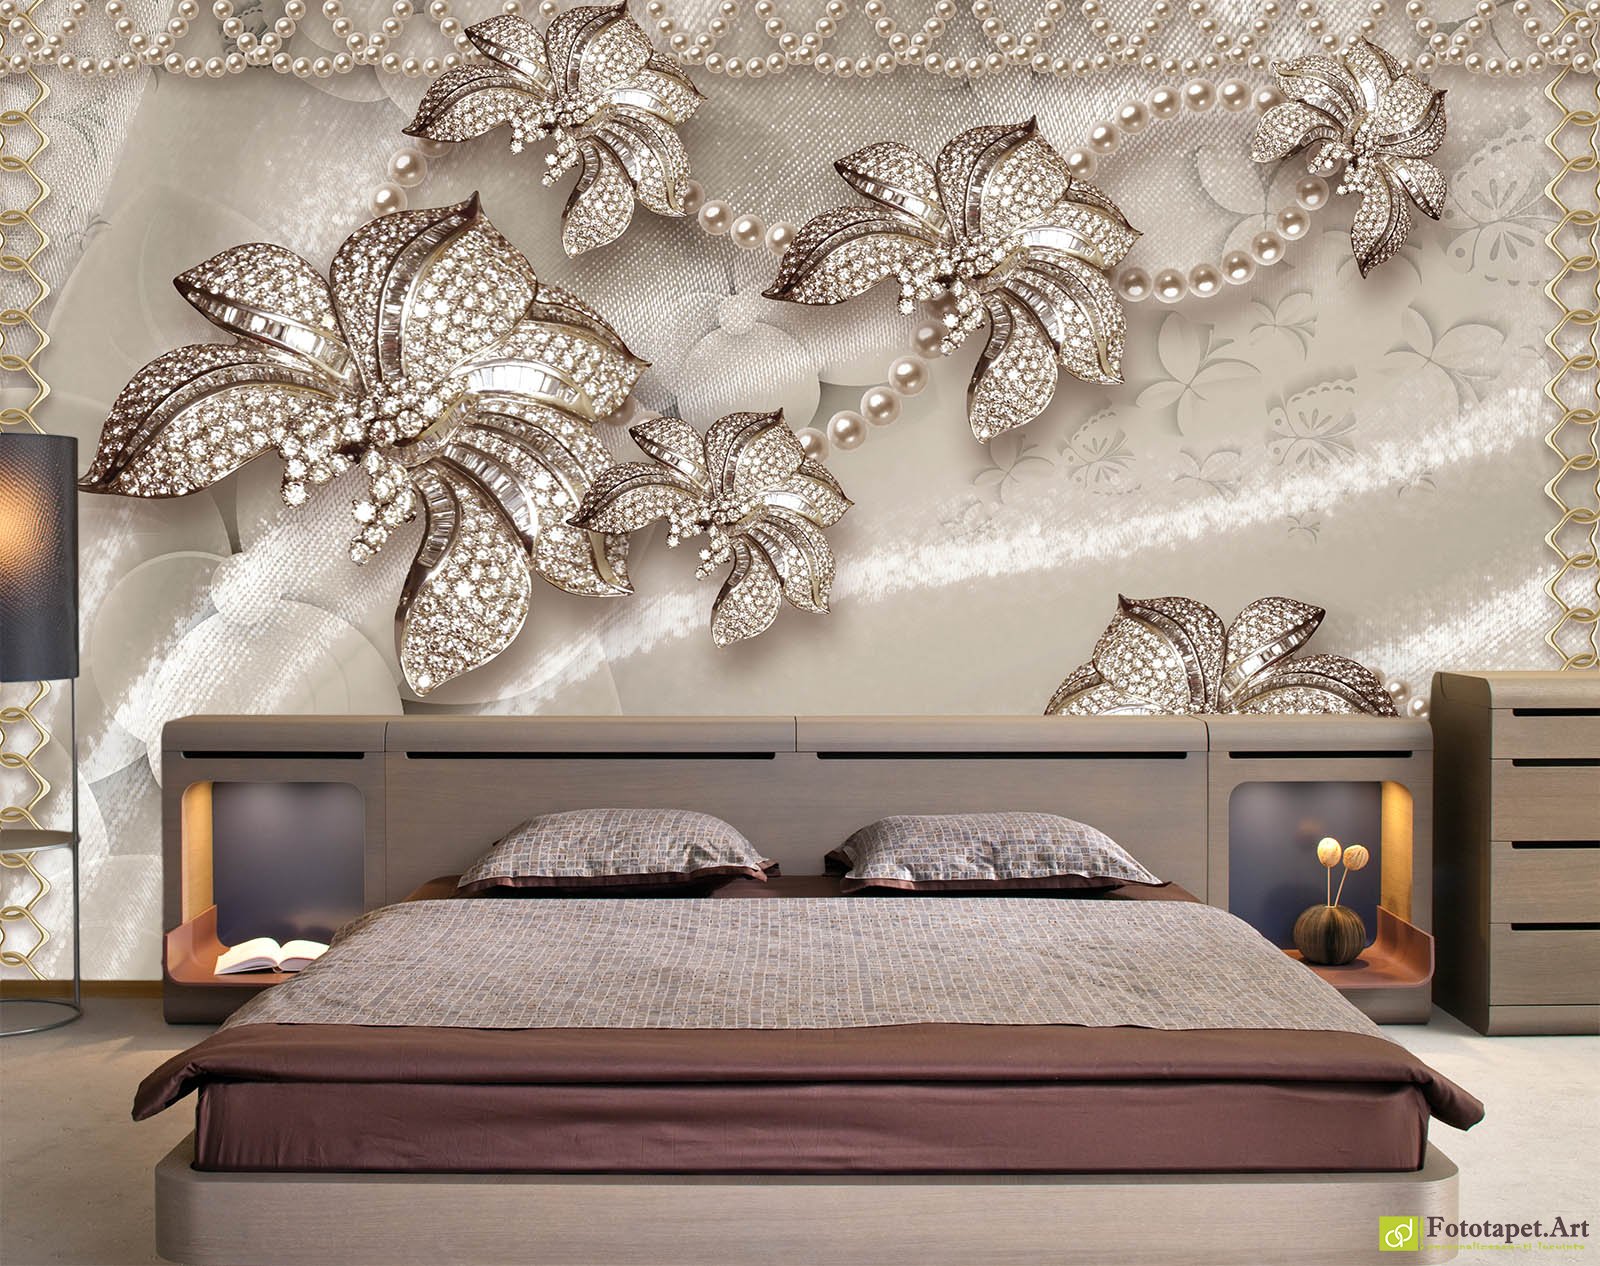 wallpaper for walls,bedroom,wall,room,bed frame,bed